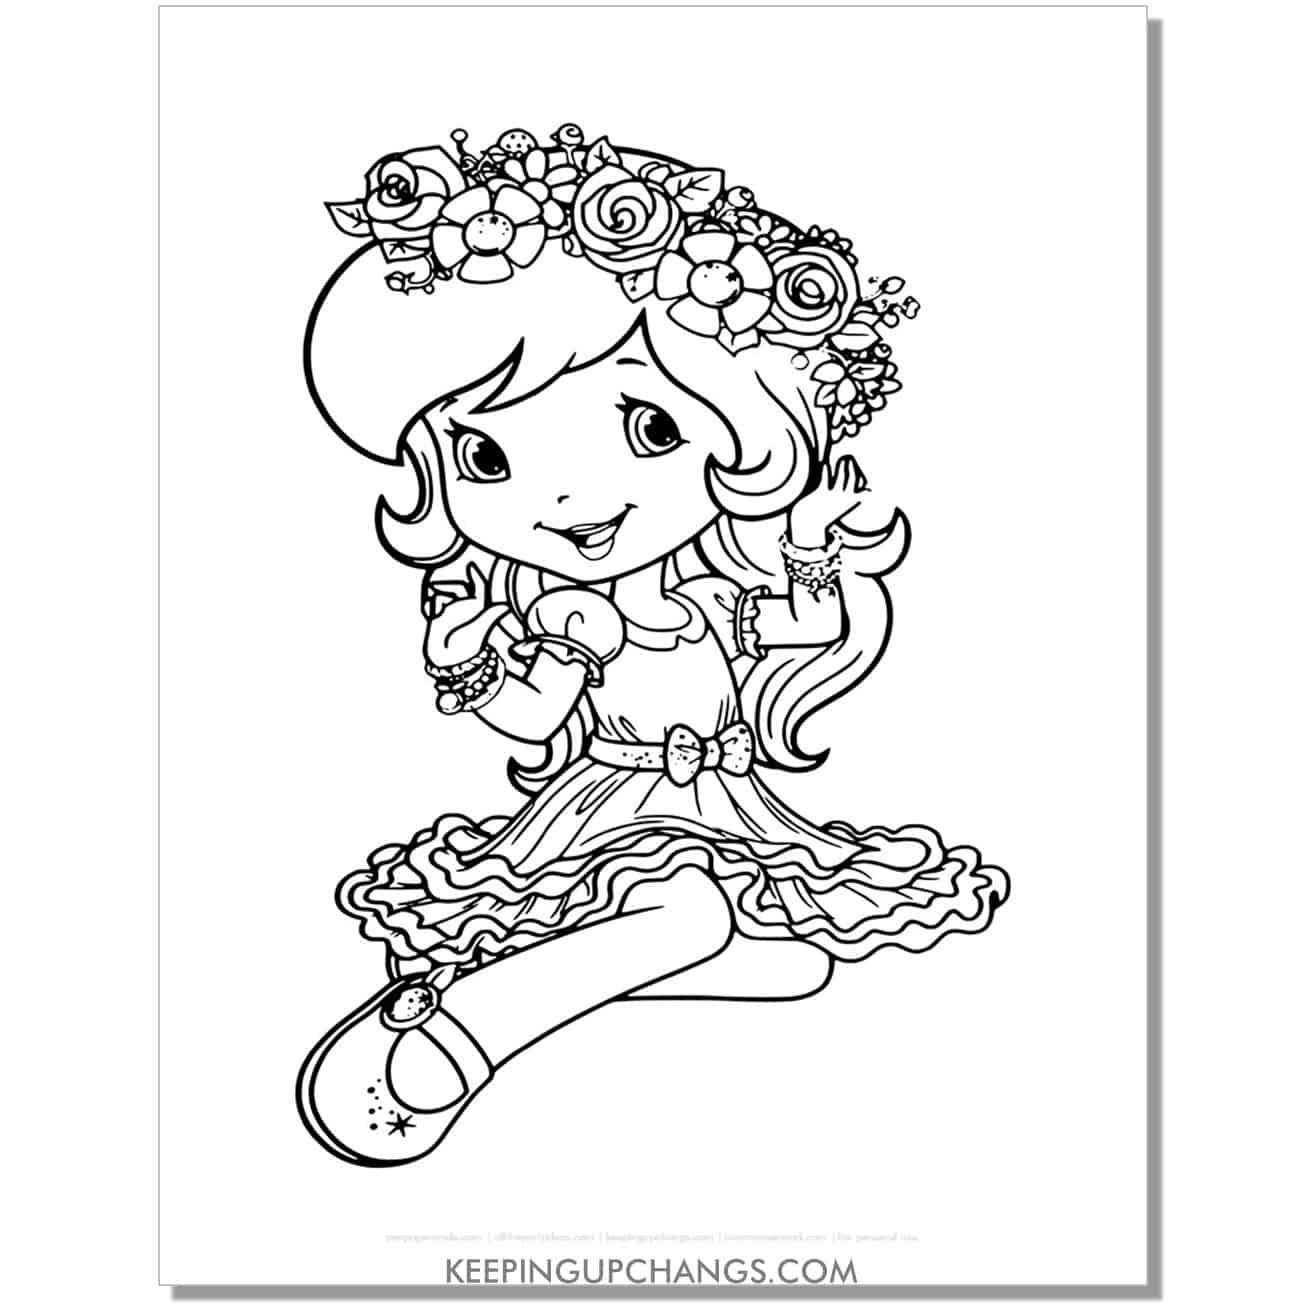 free orange blossom with flower crown strawberry shortcake coloring page, sheet.